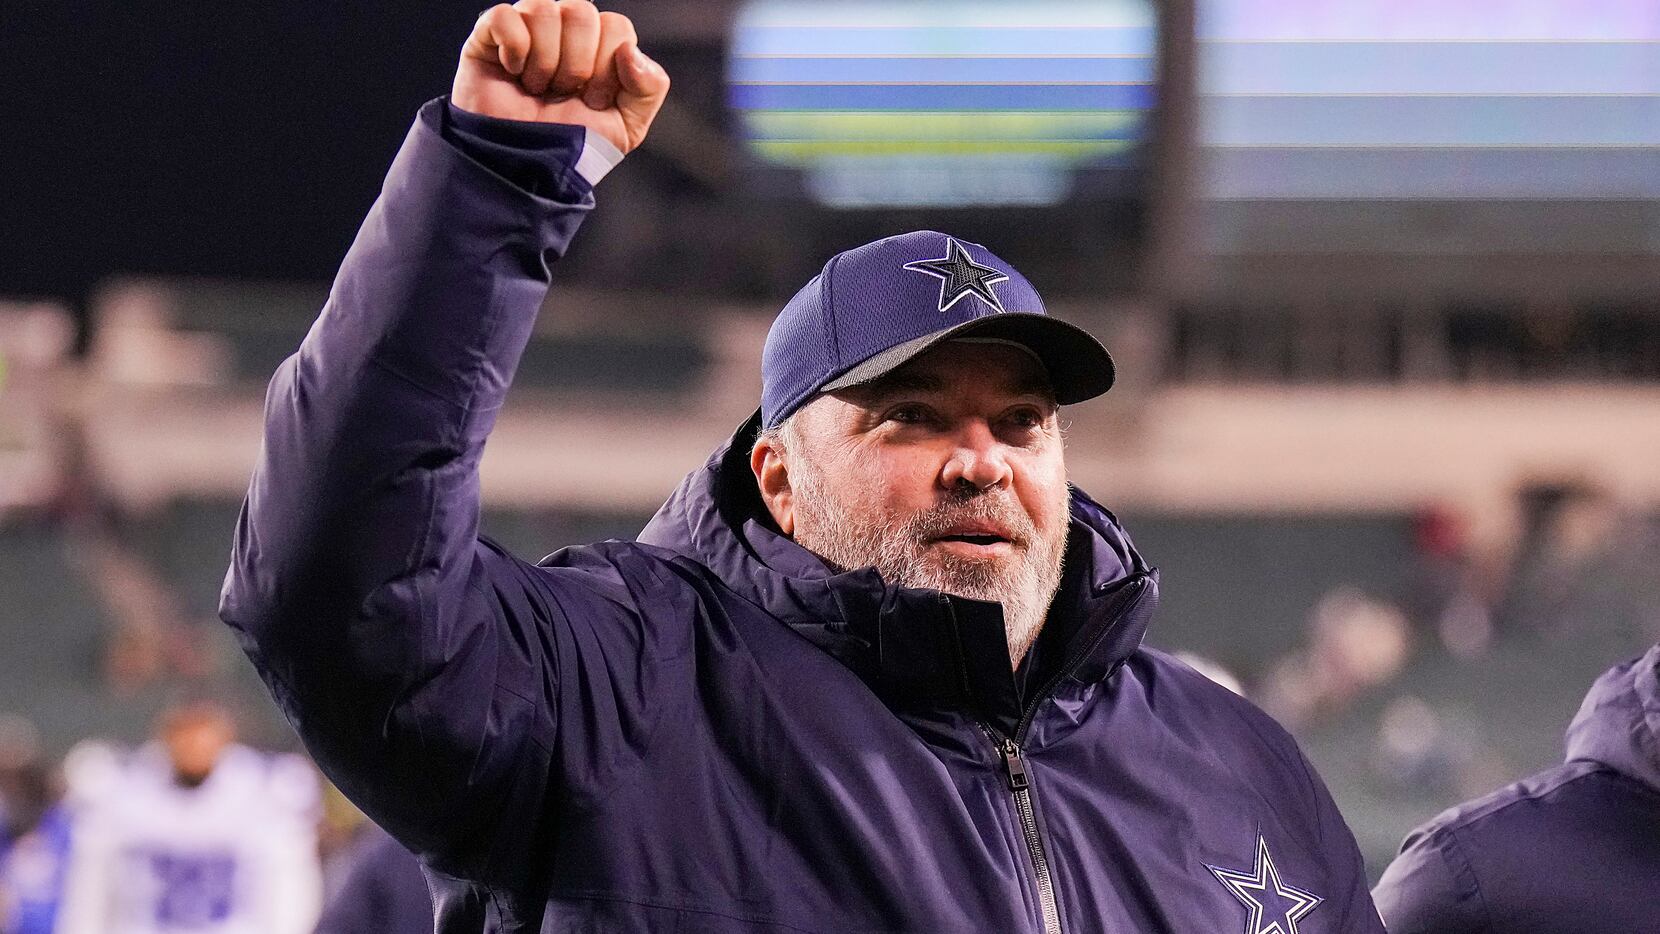 National analyst likes Cowboys' 'Super Bowl window' with Mike